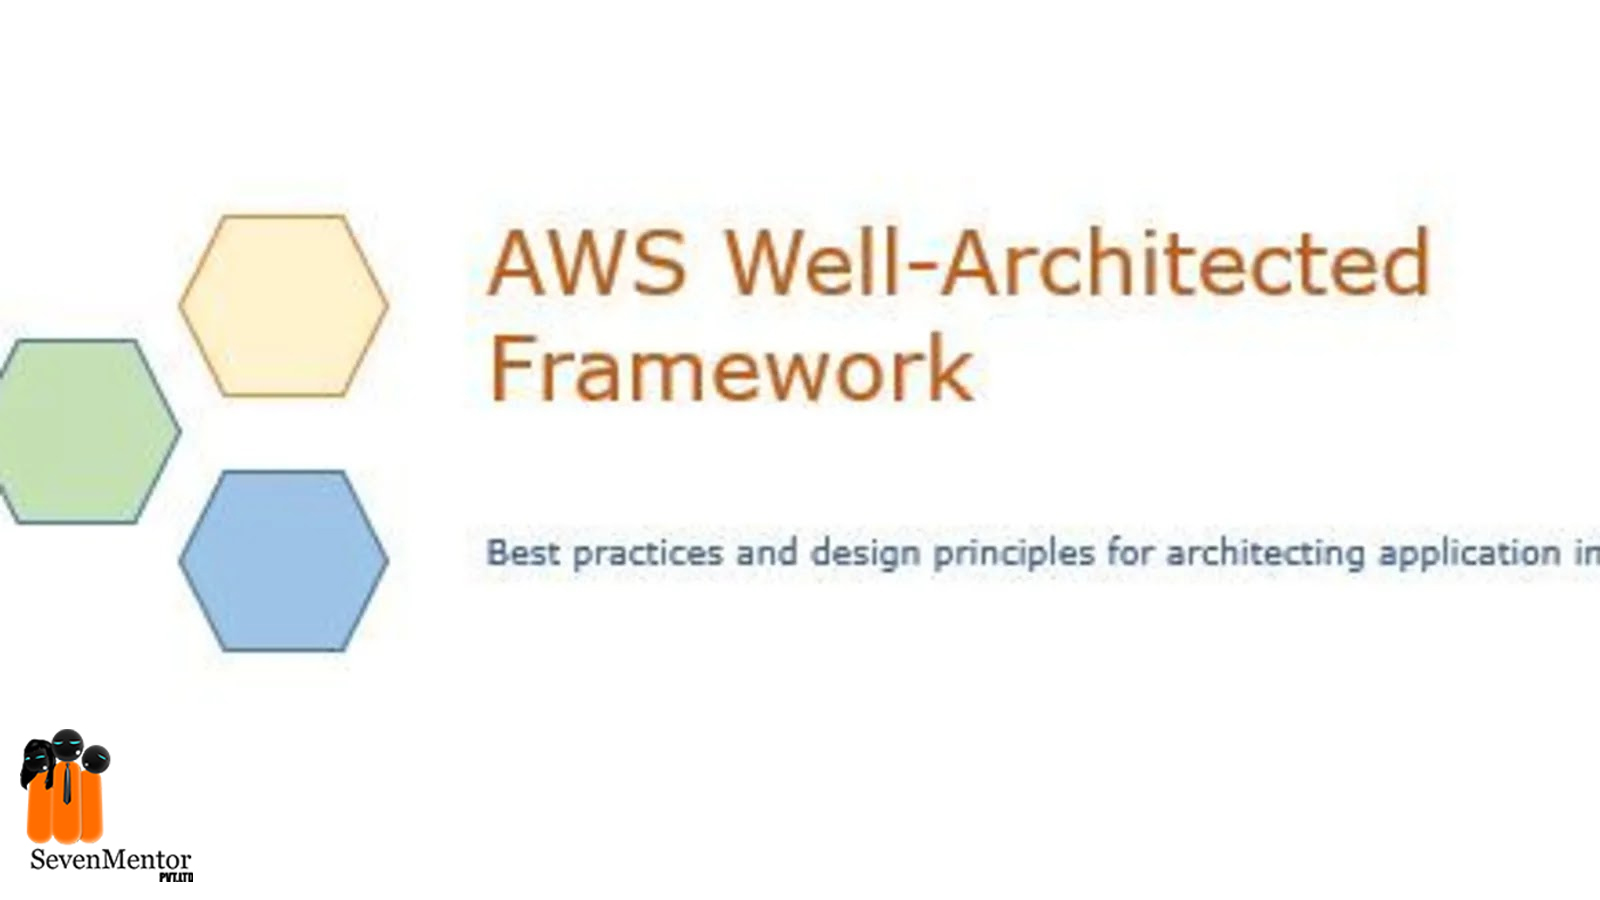 AWS Well-Architected Framework and Best Practices